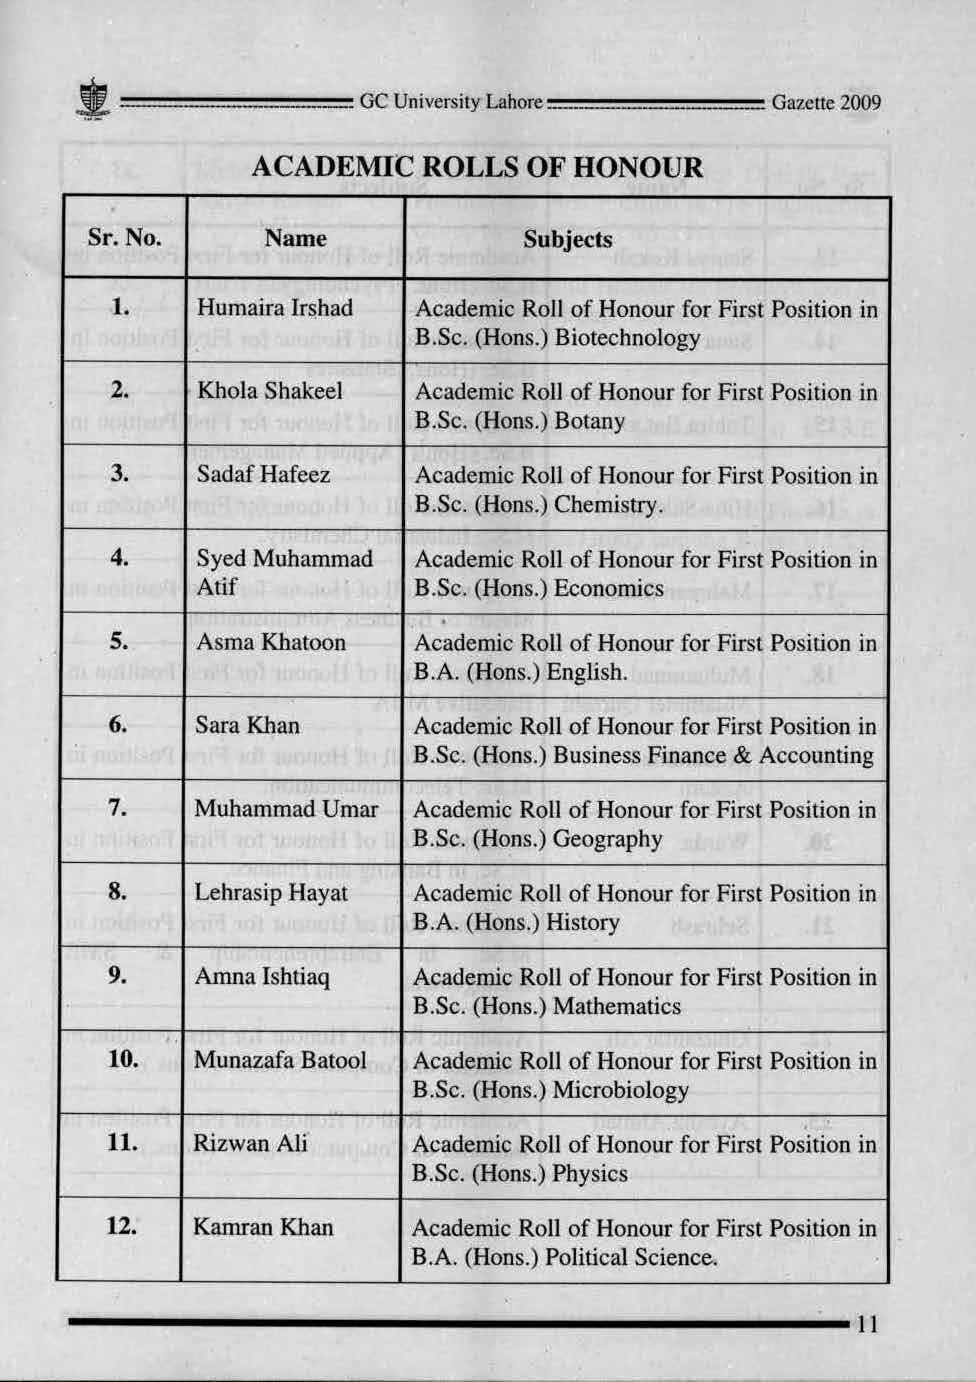 :; =====----GC University Lahore ========Gazctle 2009 ACADEMIC ROLLS OF HONOUR Sr. No. Name Subjects I. Humaira Jrshad Academic Roll of Honour for First Position in B.Sc. (Hons.) Biotechnology 2.